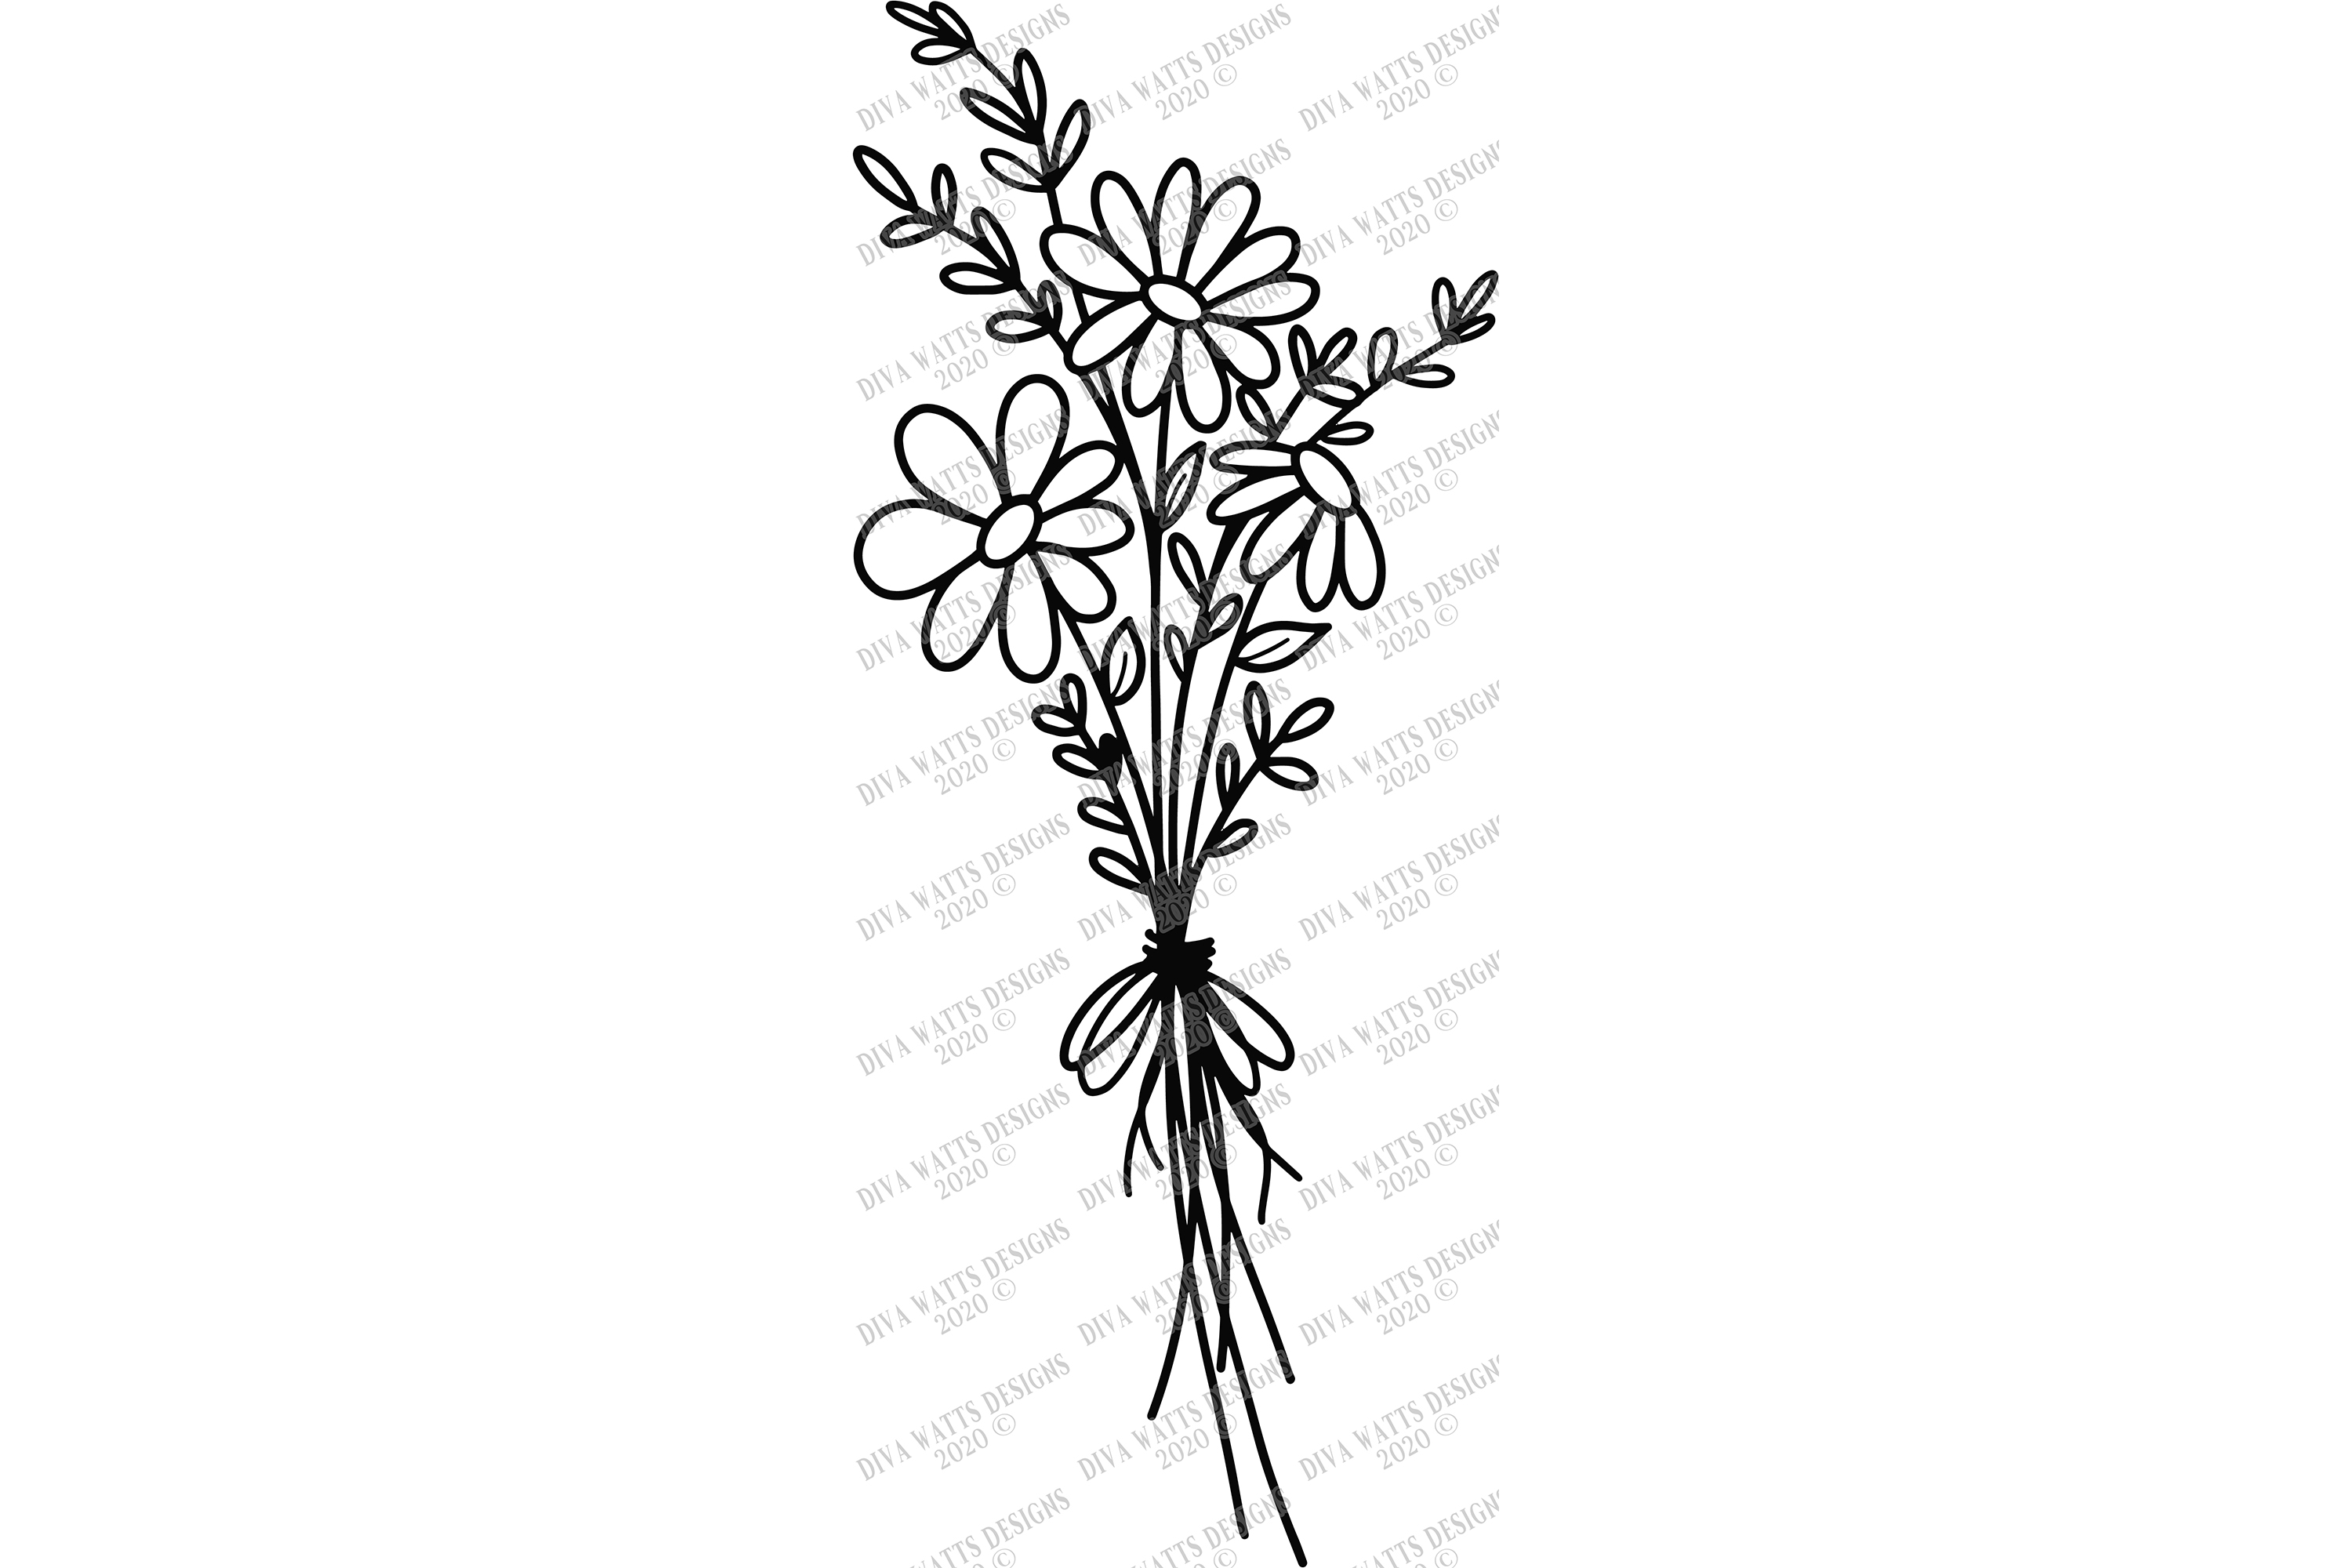 Daisies and Wildflowers Bouquet - Flowers - Floral - SVG EPS